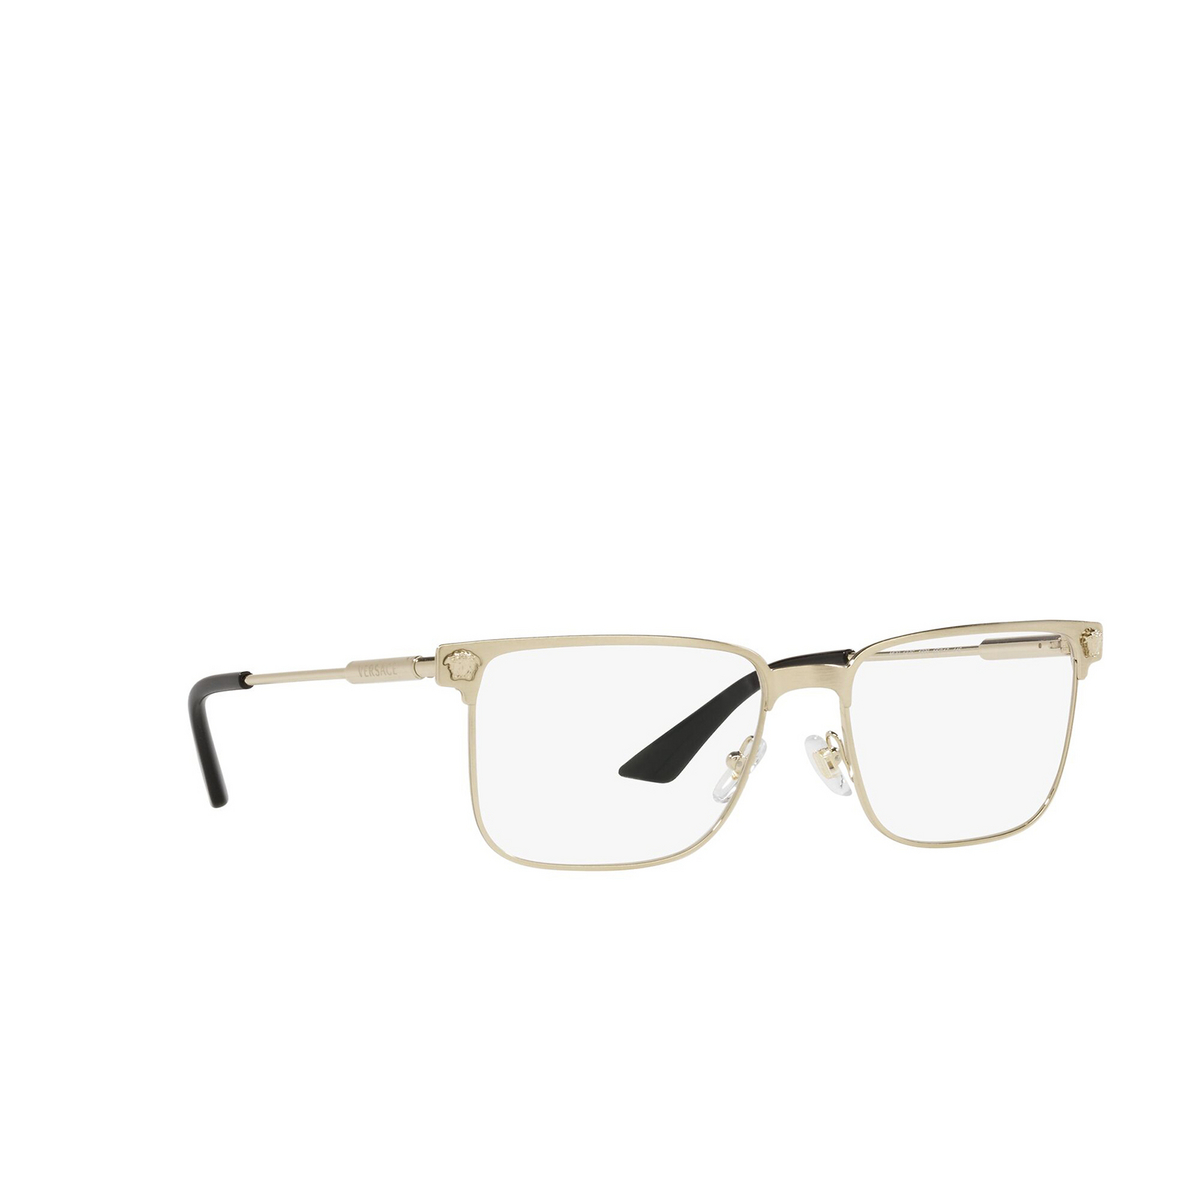 Versace® Rectangle Eyeglasses: VE1276 color Brushed Pale Gold 1339 - three-quarters view.